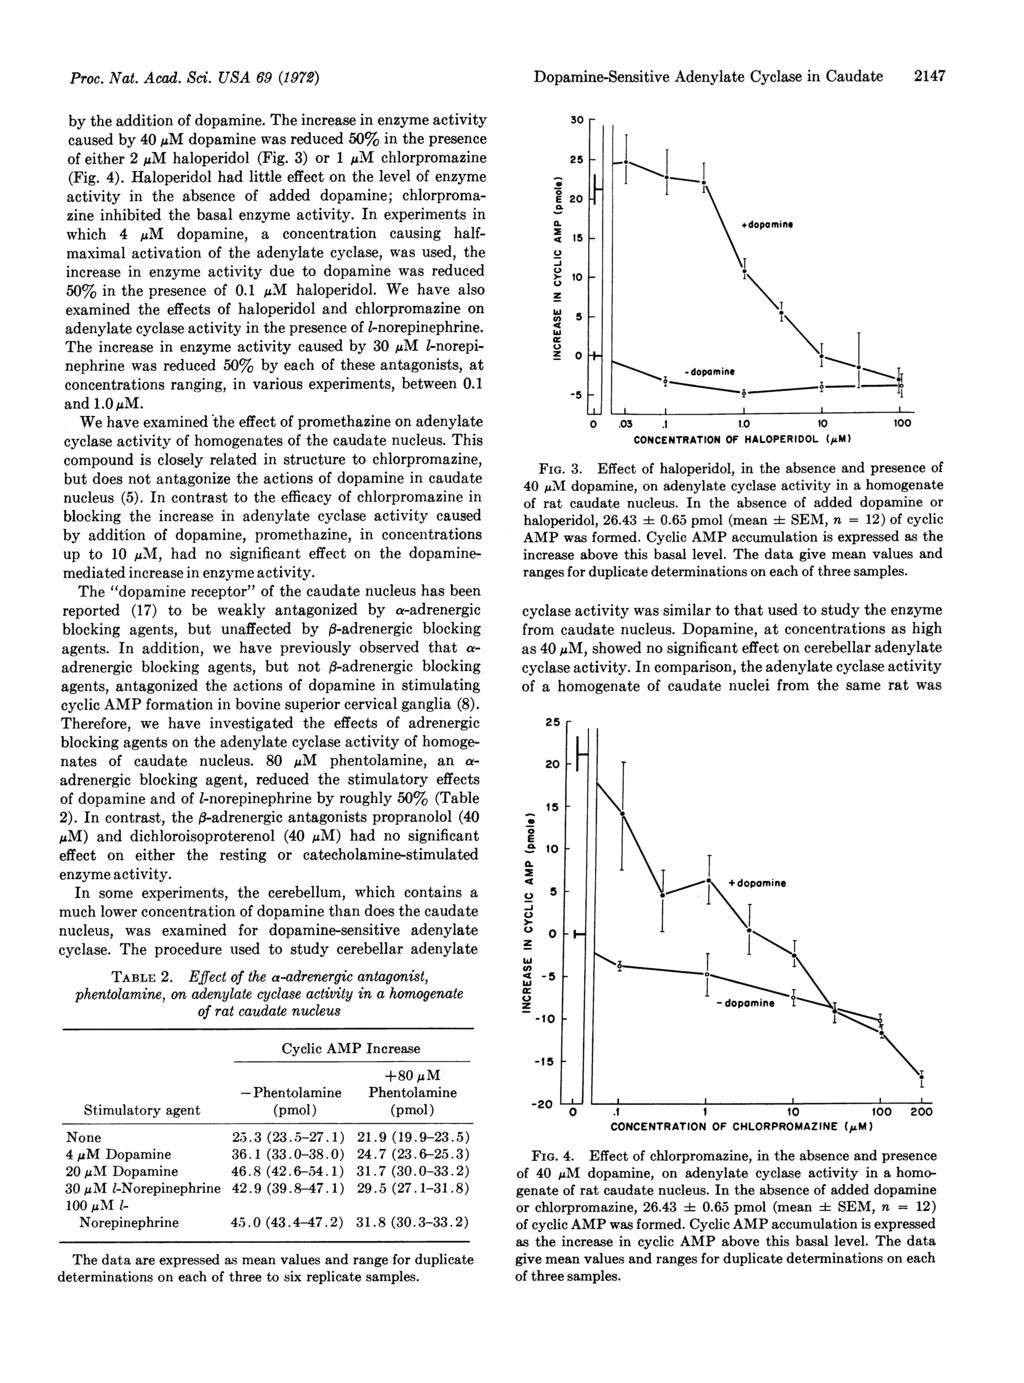 Proc. Nat. Acad. Sci. USA 69 (1972) by the addition of dopamine. The increase in enyme activity caused by 4 MM dopamine was reduced 5% in the presence of either 2 MM haloperidol (Fig.